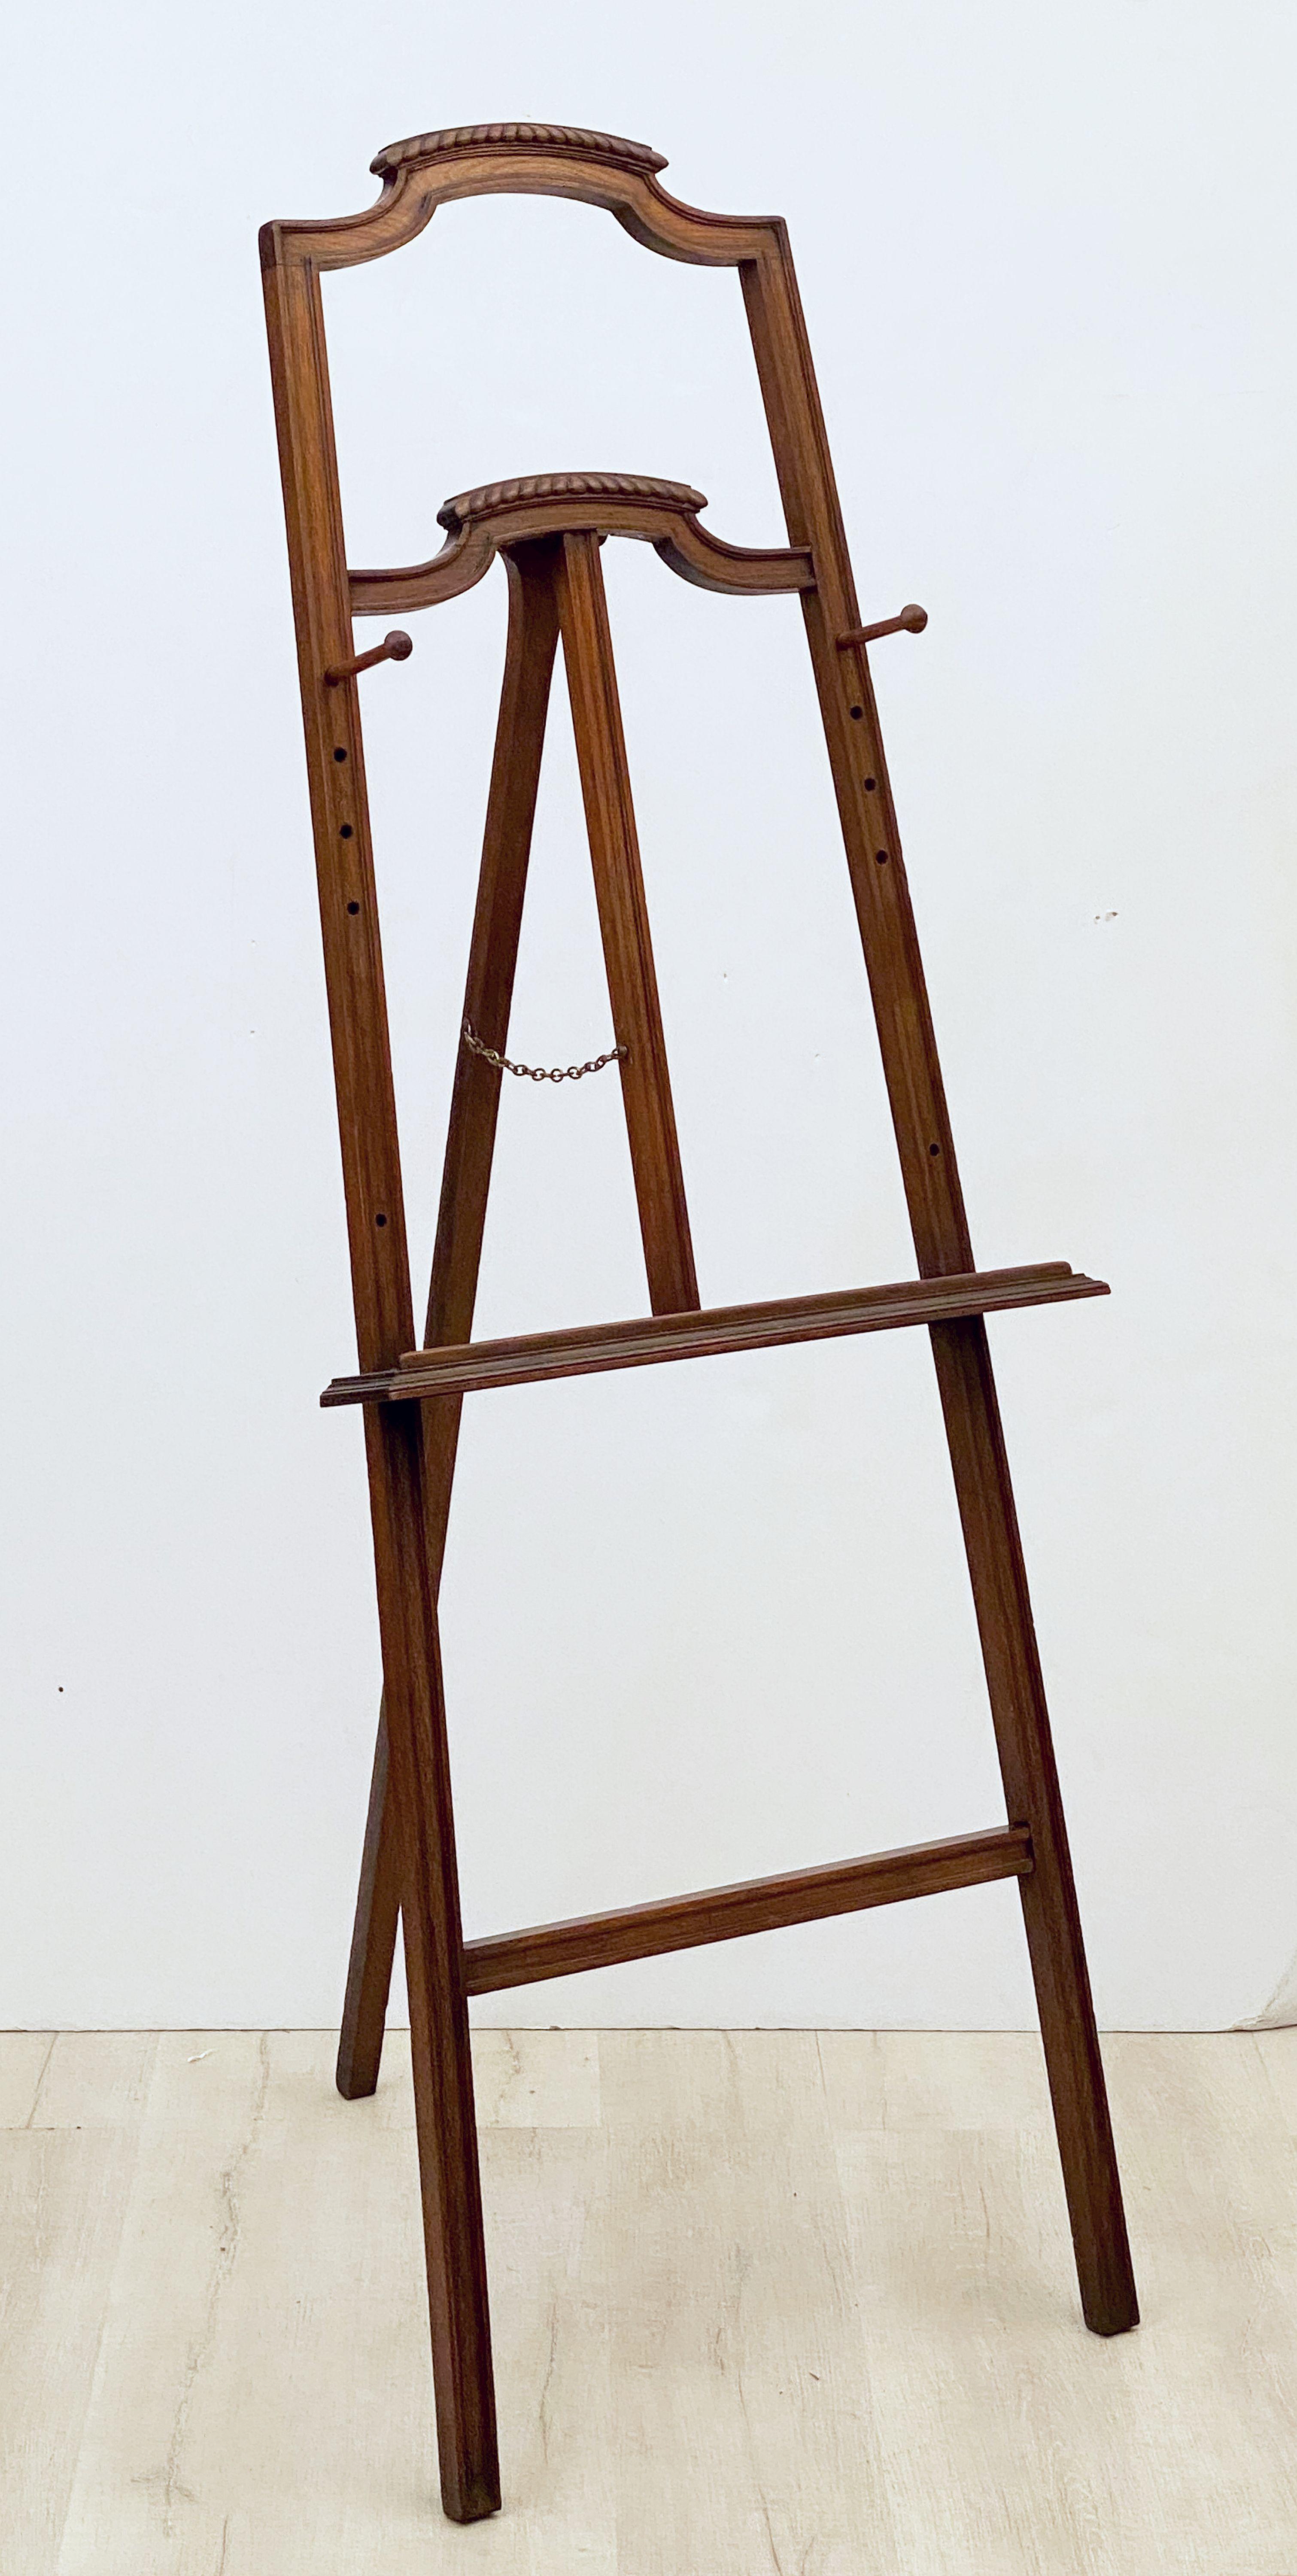 English Artist's or Display Easel with Carved Wood Accents 1